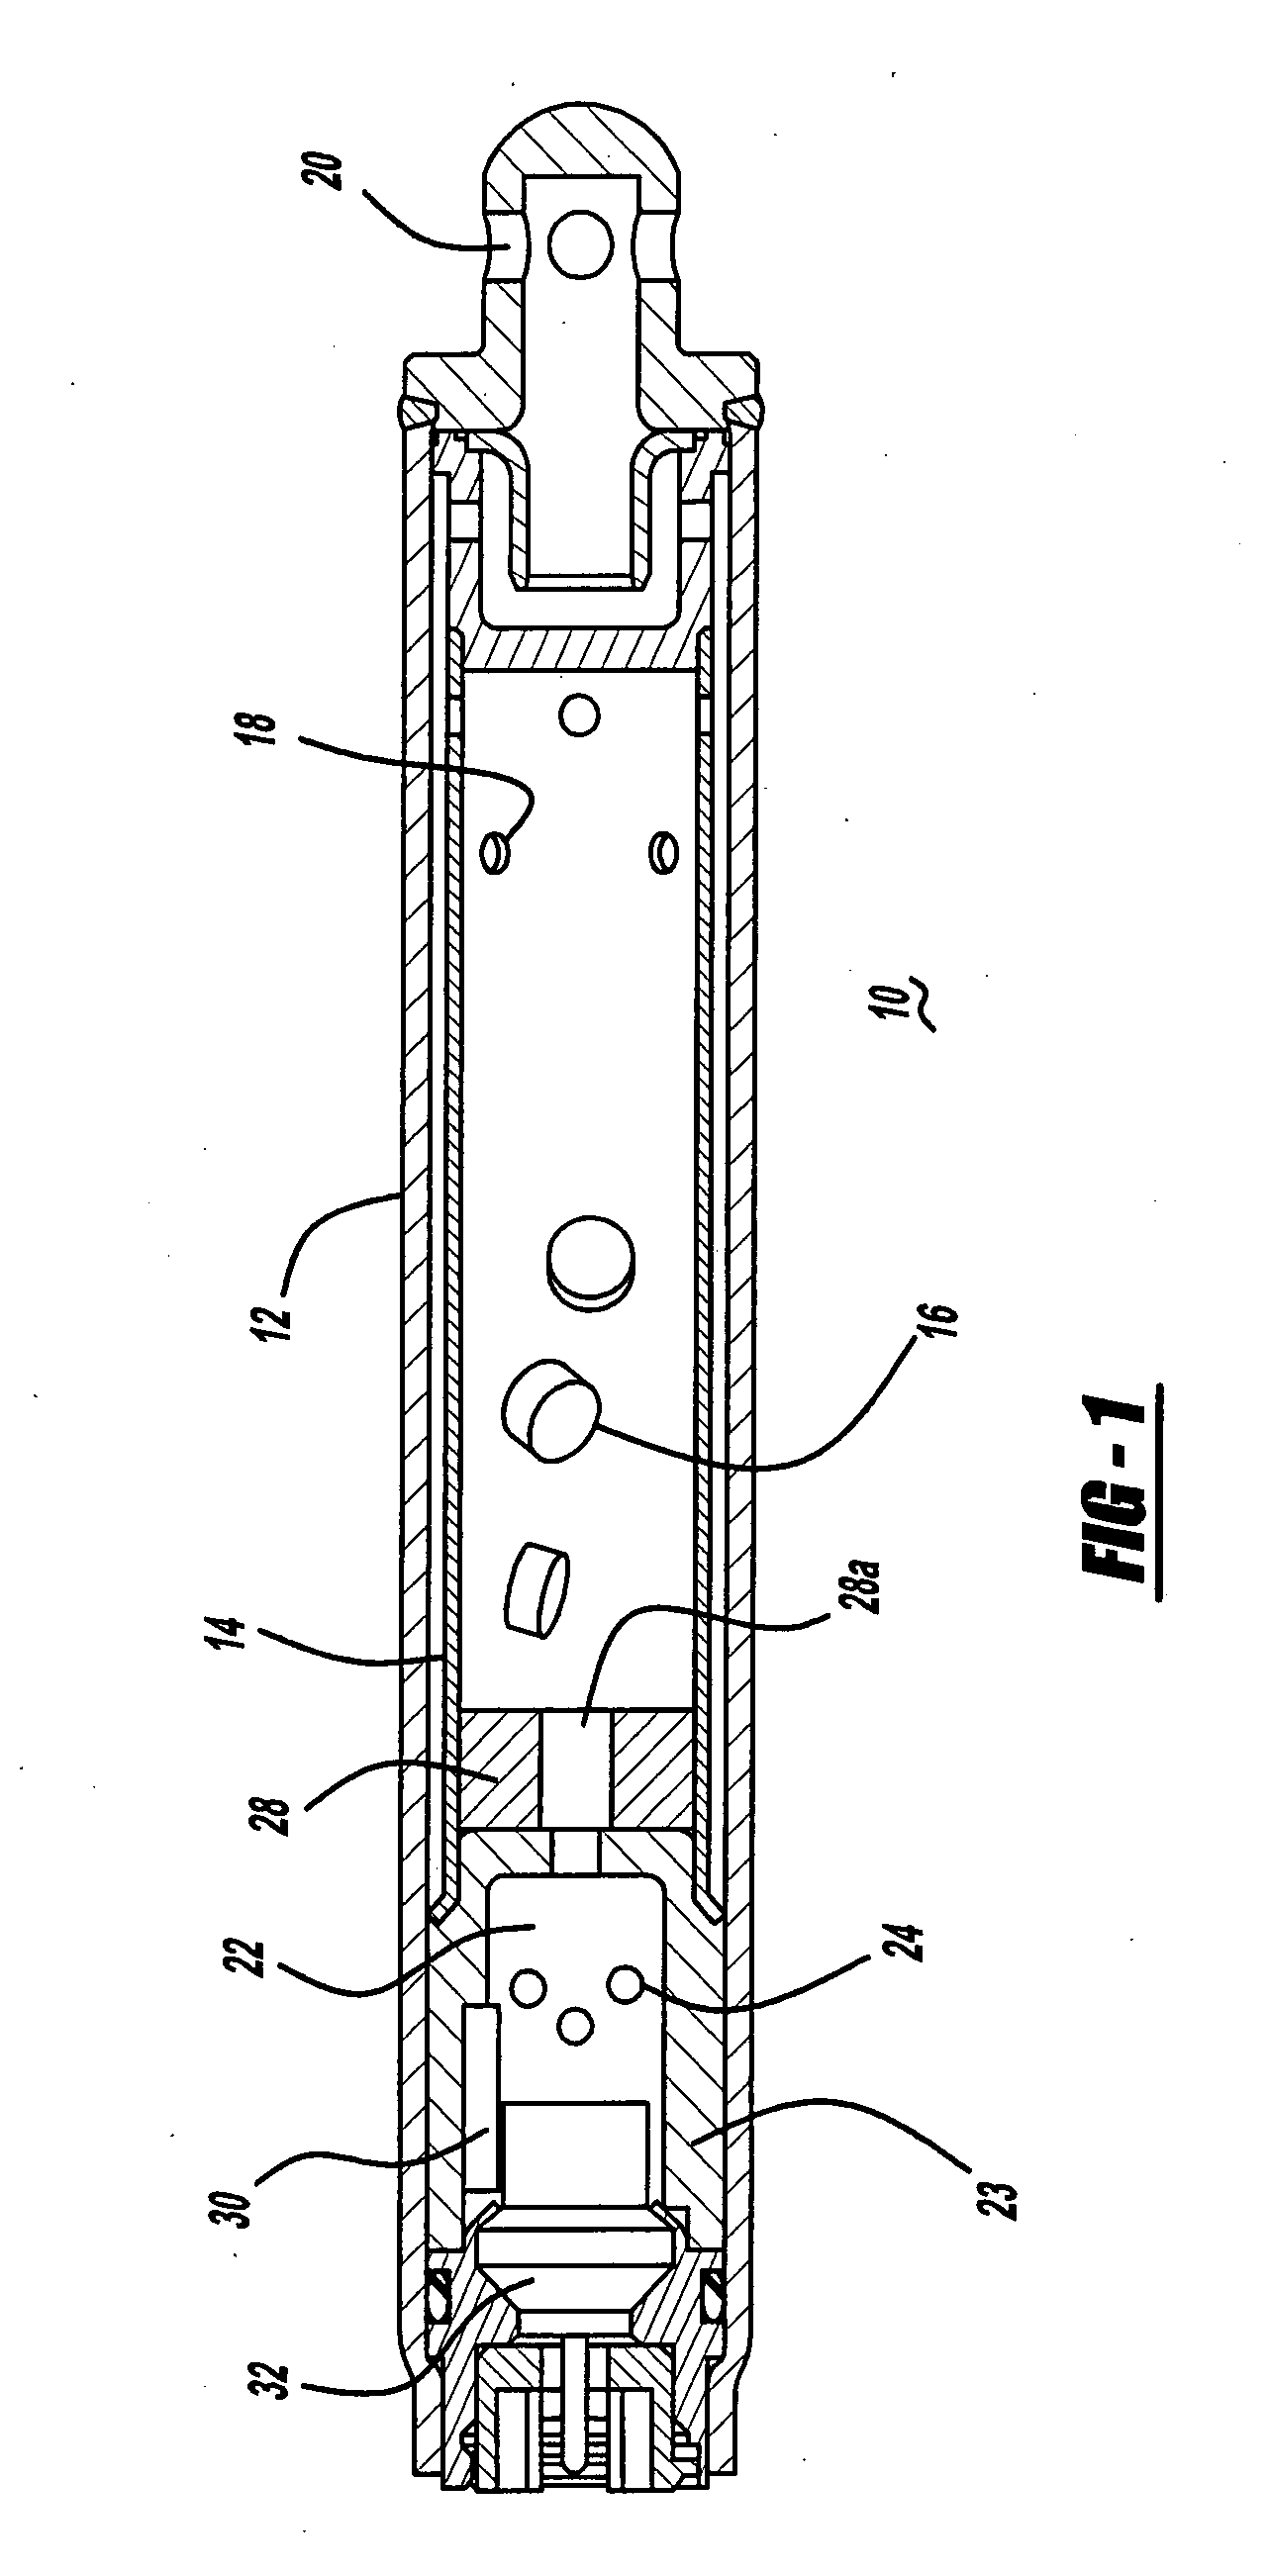 Gas generating system and composition